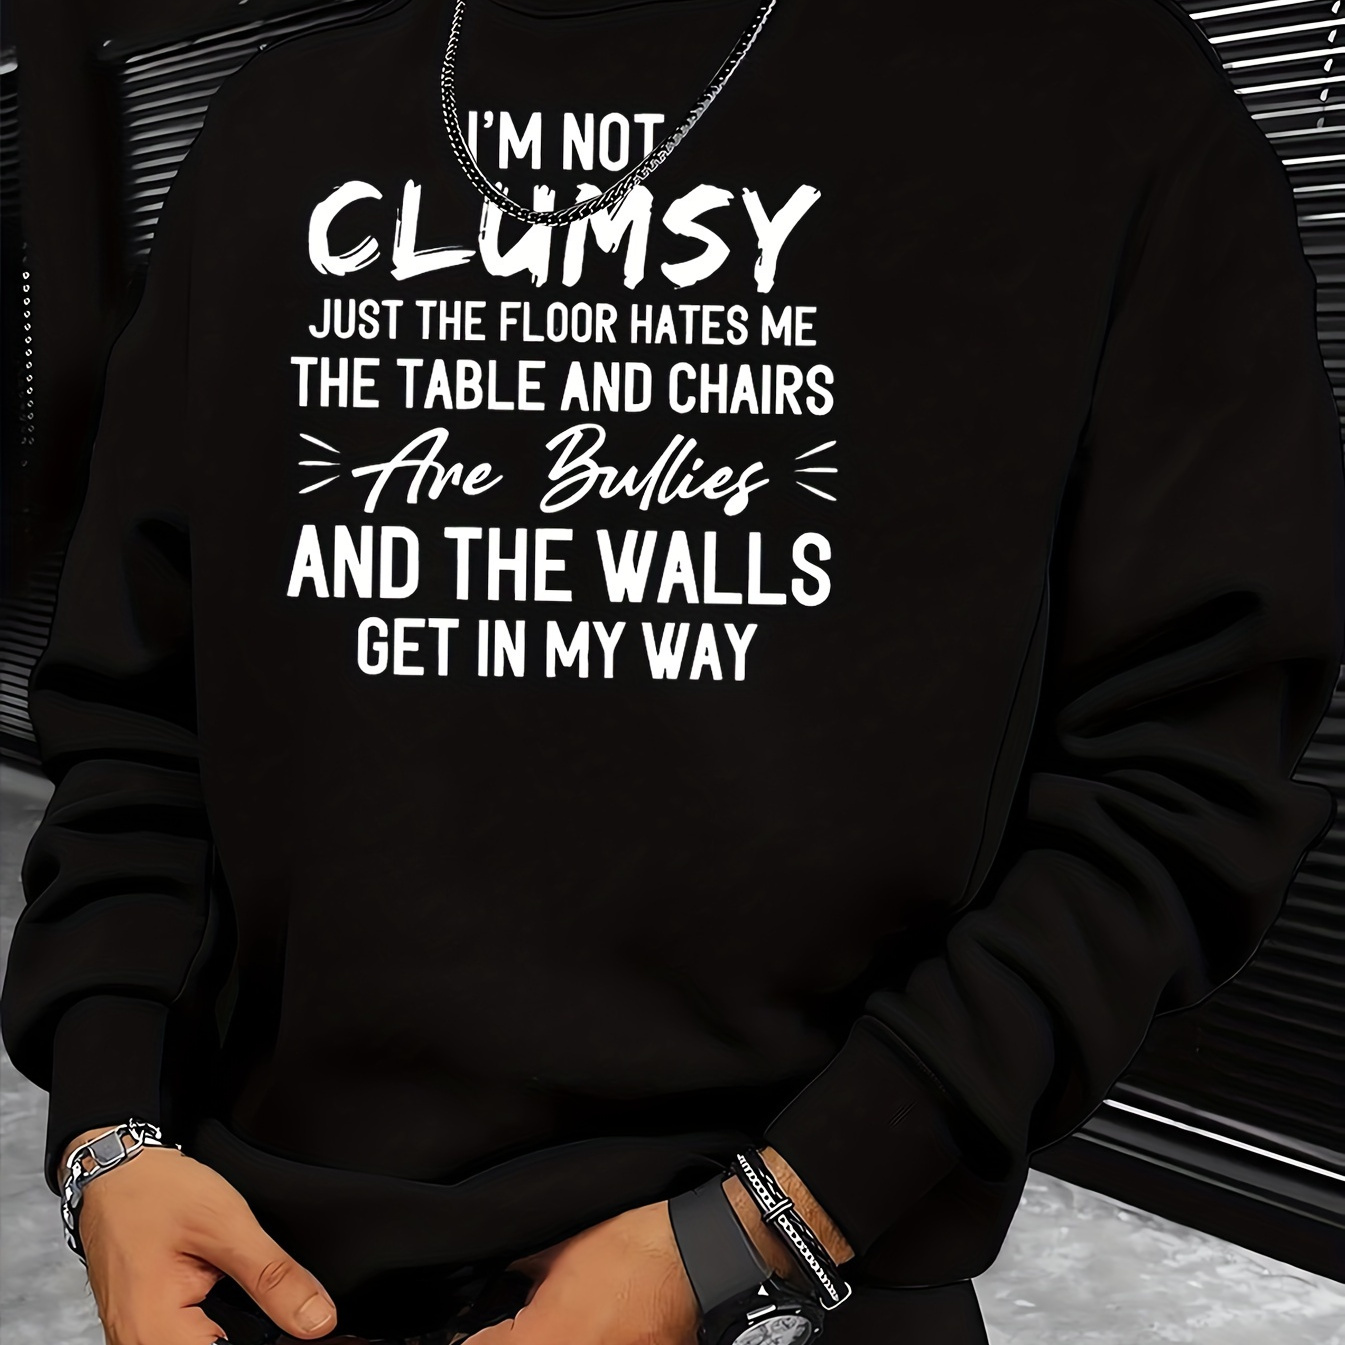 

I'm Not Clumsy Print, Sweatshirt With Long Sleeves, Men's Casual Creative Graphic Design Slightly Flex Crew Neck Pullover For Spring Fall And Winter